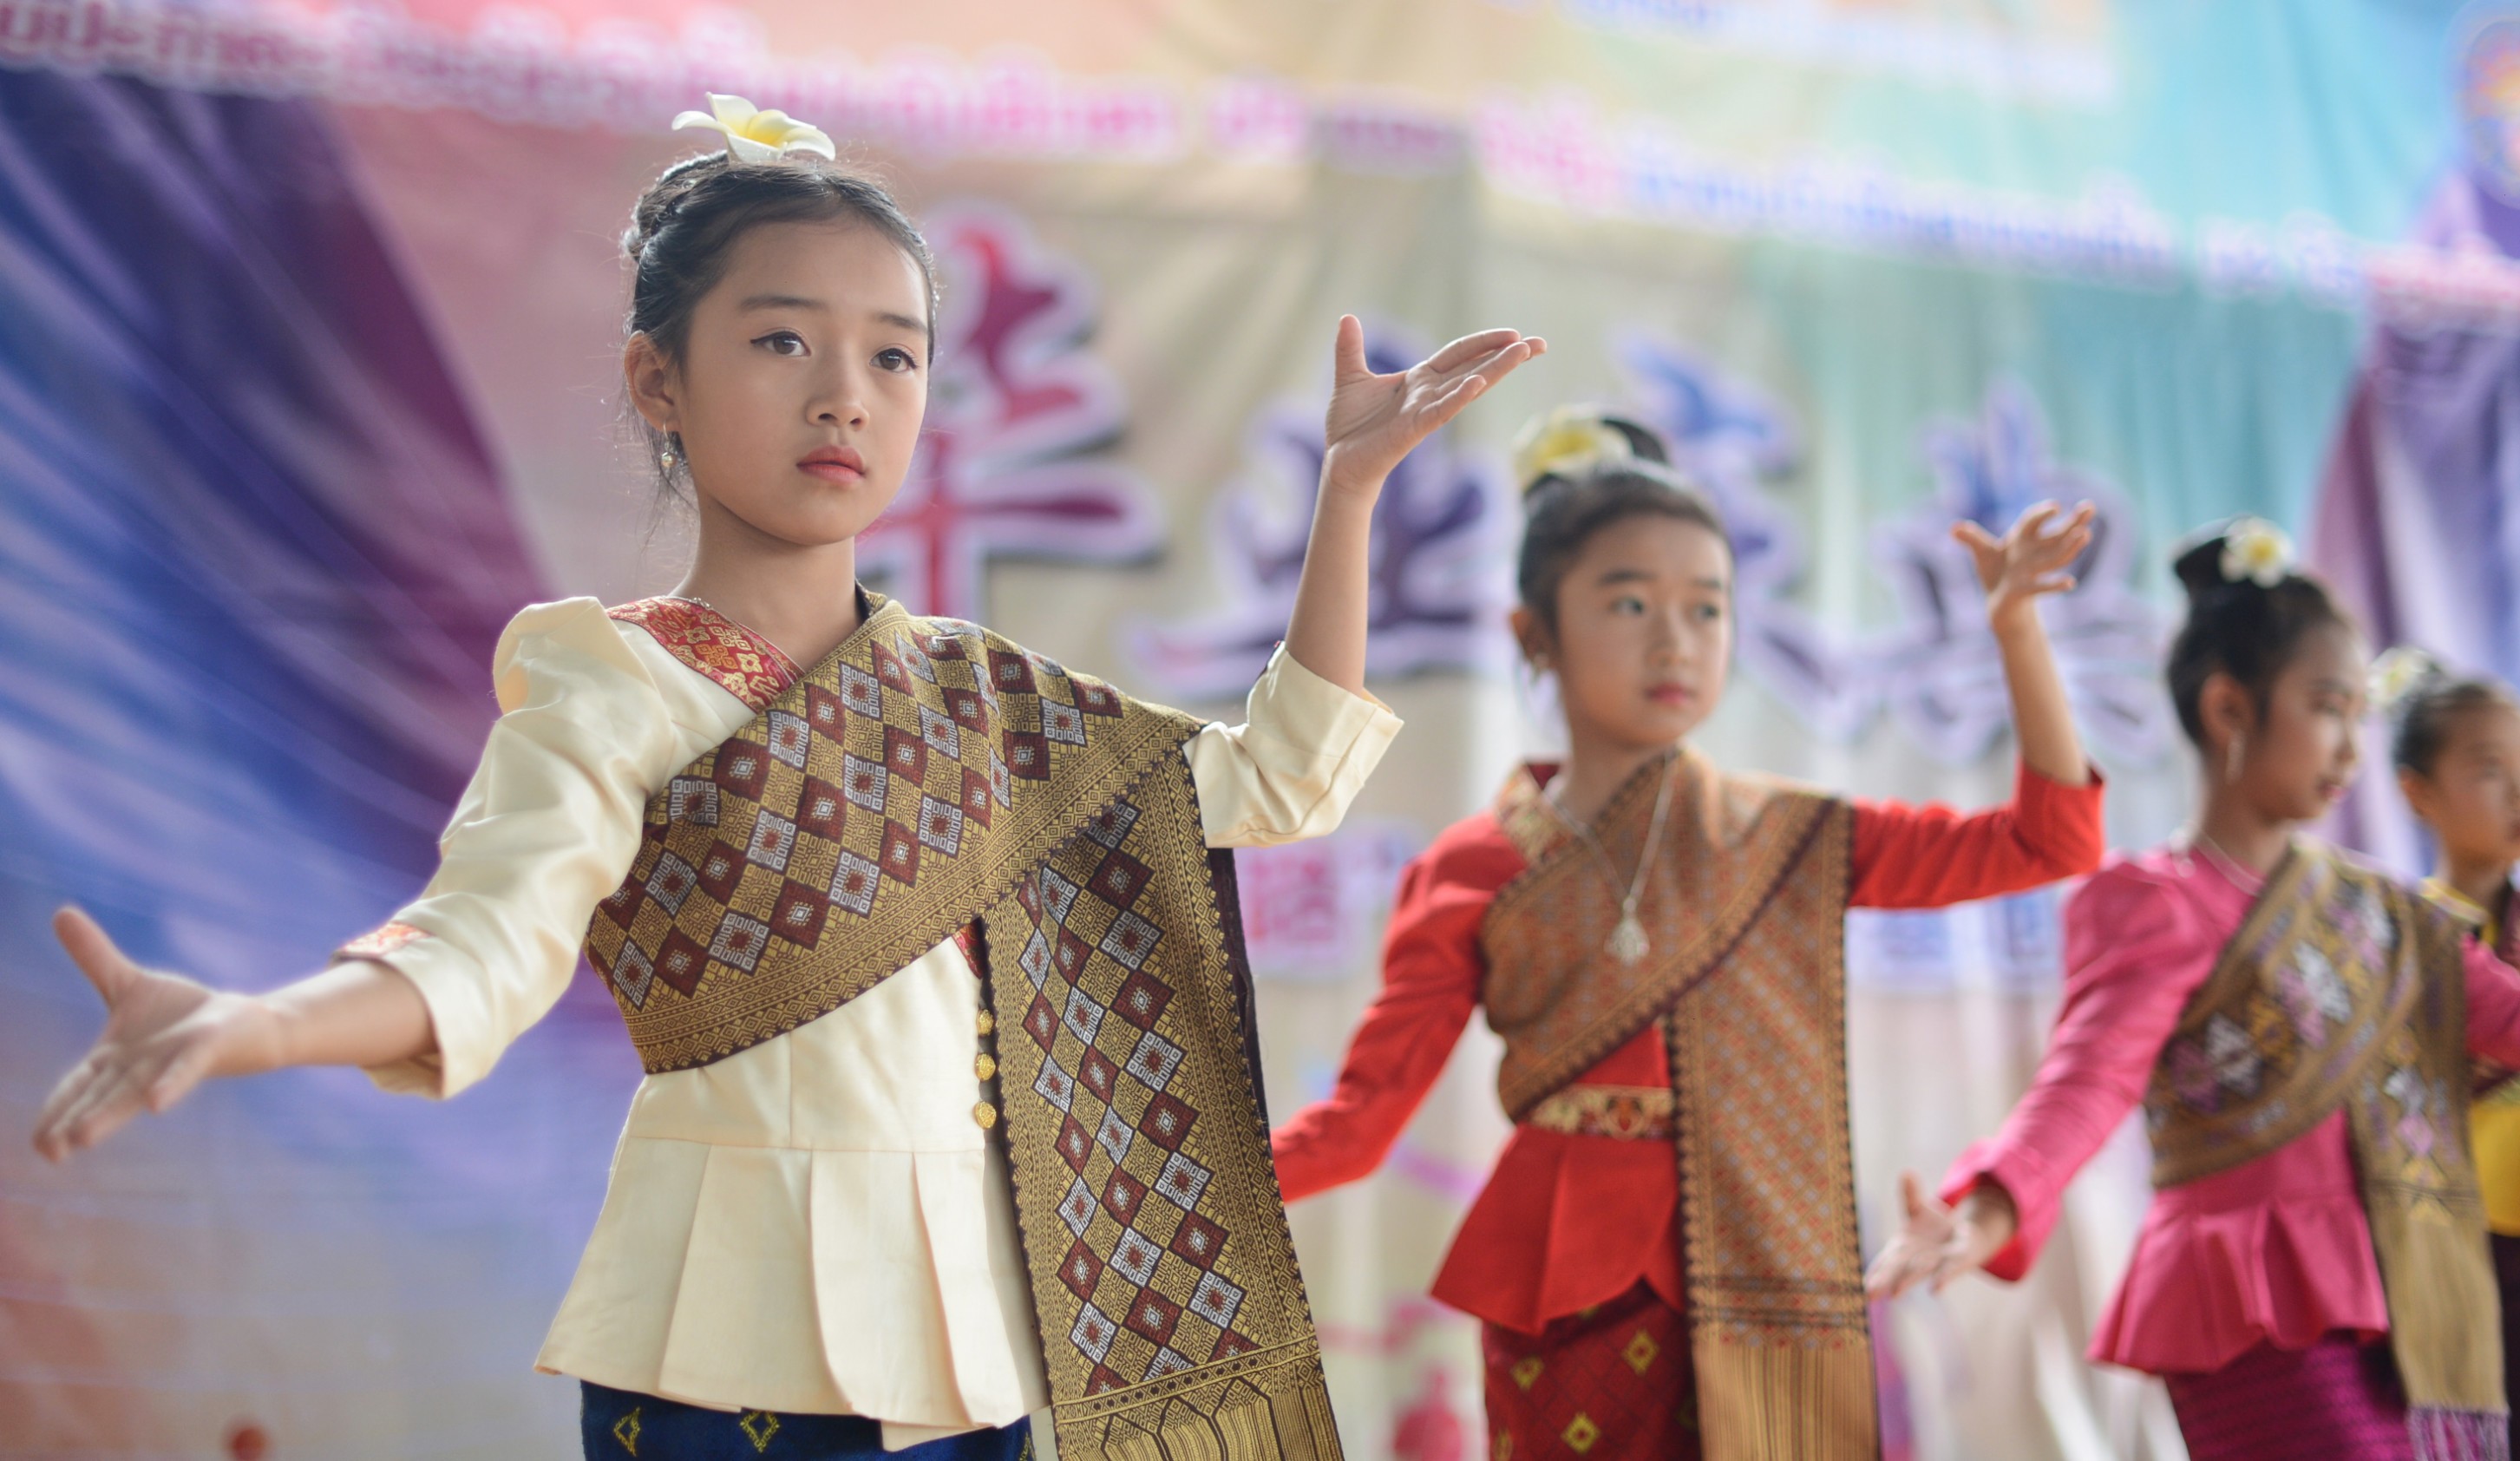 Girls dance at a graduation ceremony held at Mitthaphab School in Oudomxay Province, Laos. The school, founded in 2006, teaches both Chinese and Laotian. As China’s infrastructure spending in Southeast Asian nations grows, the US could ramp up its provision of education, health and finance services in the region. Photo: Xinhua